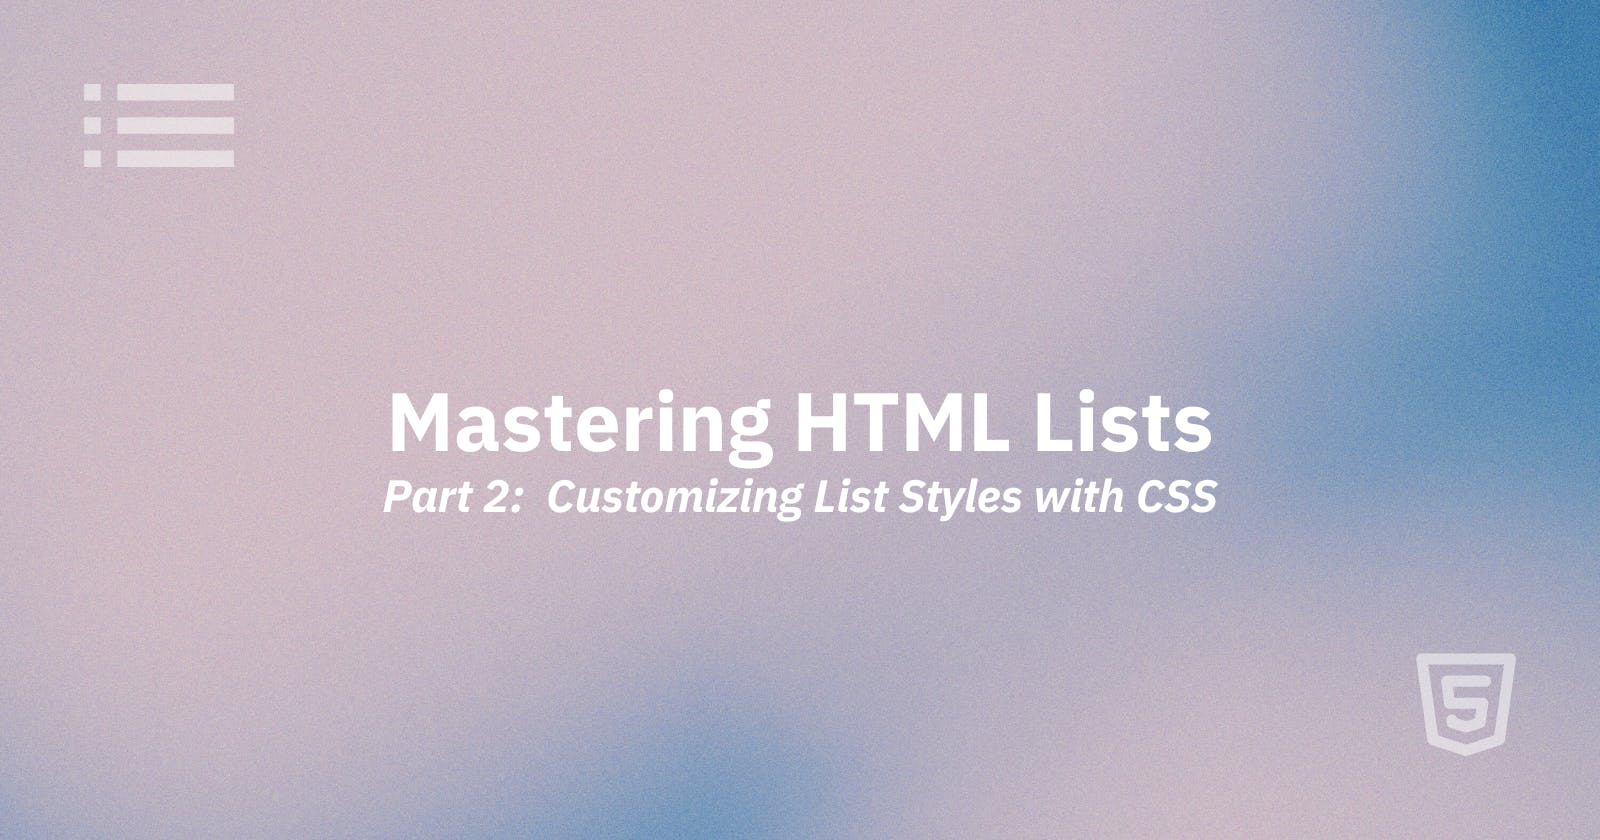 Customizing List Styles with CSS: Dress Your Lists to Impress! 💅